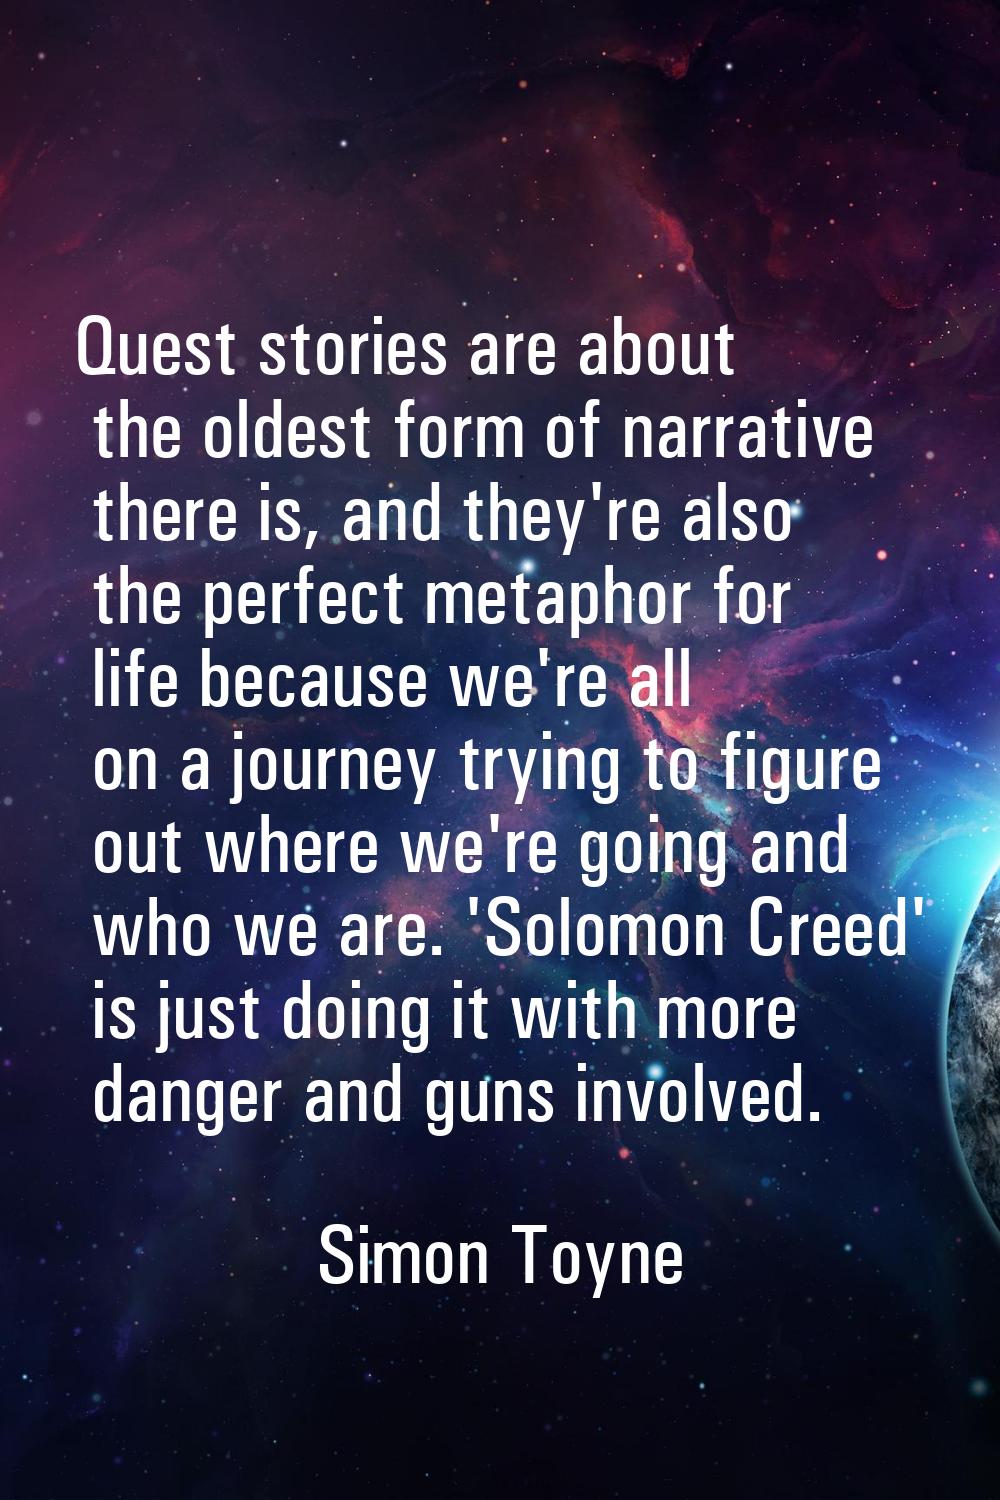 Quest stories are about the oldest form of narrative there is, and they're also the perfect metapho